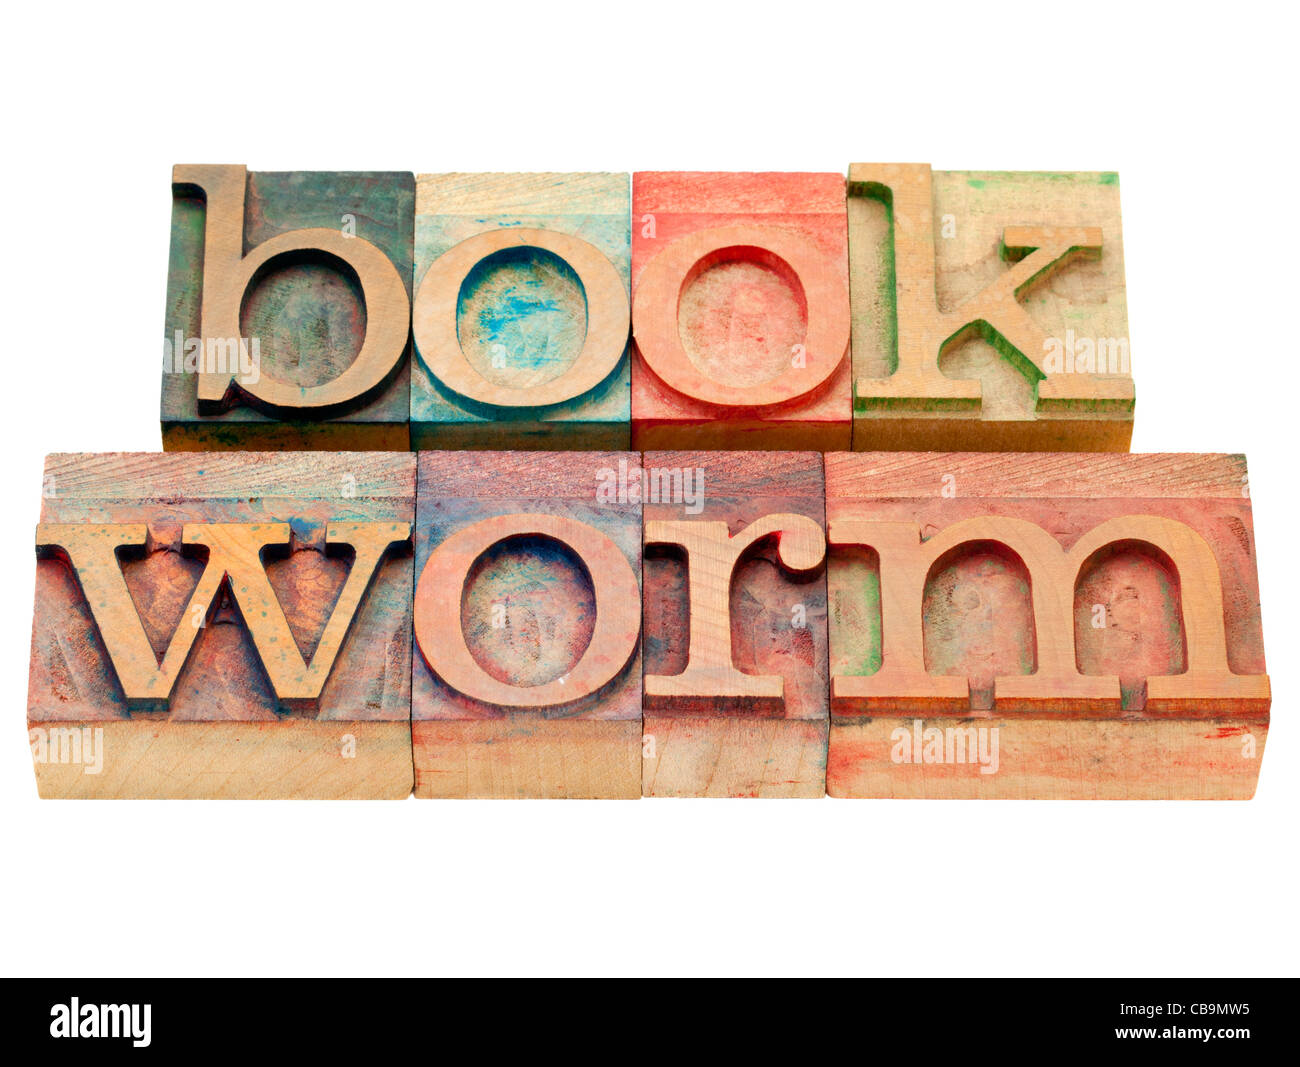 bookworm - isolated text in vintage wood letterpress printing blocks Stock Photo